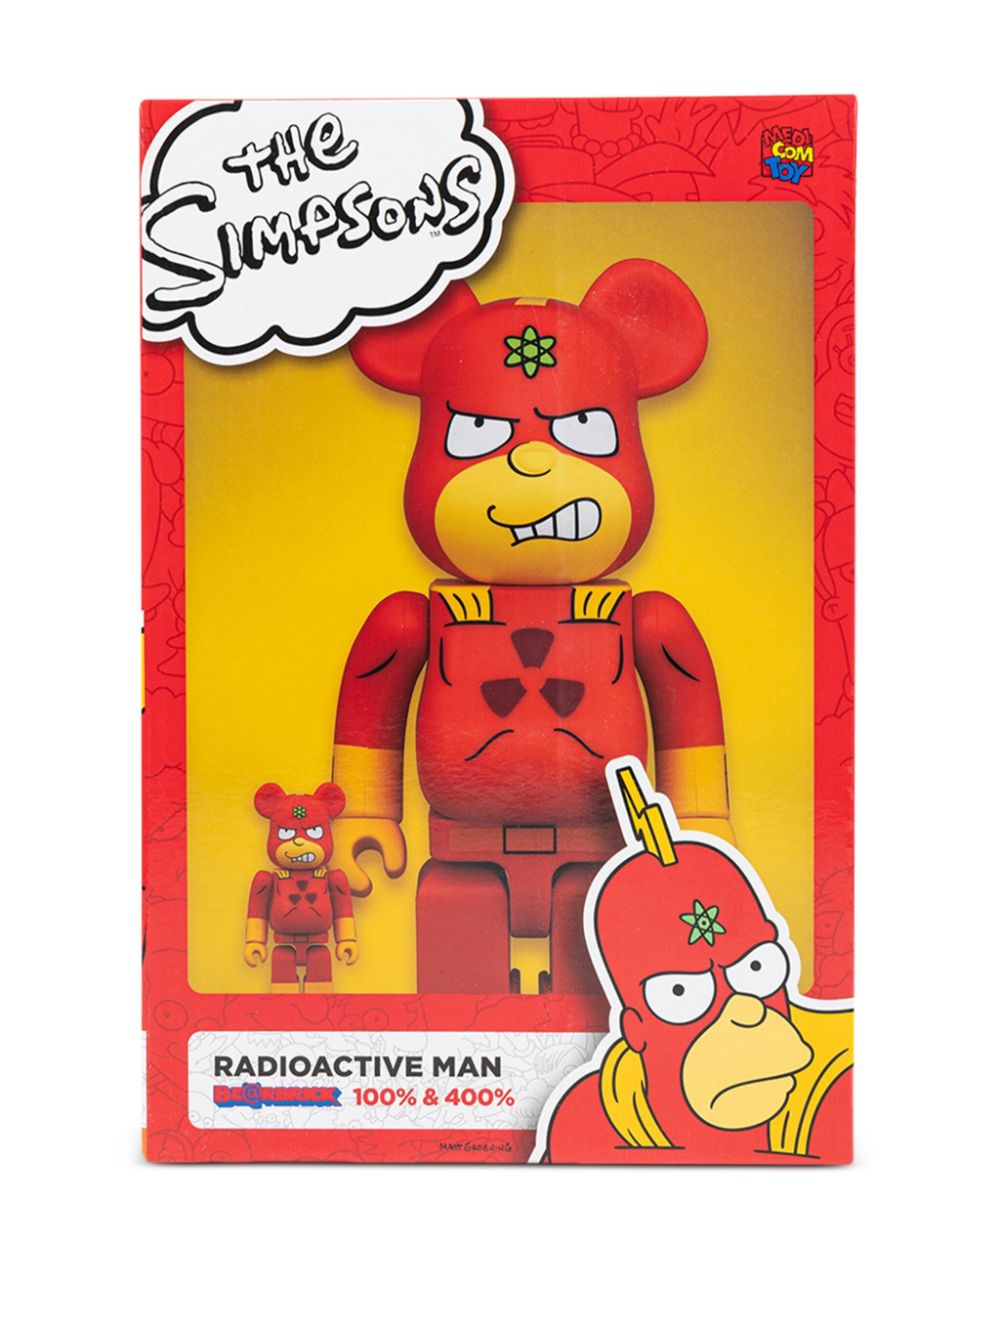 Shop Medicom Toy X The Simpsons Radioactive Man Be@rbrick 100% And 400% Figure Set In Red